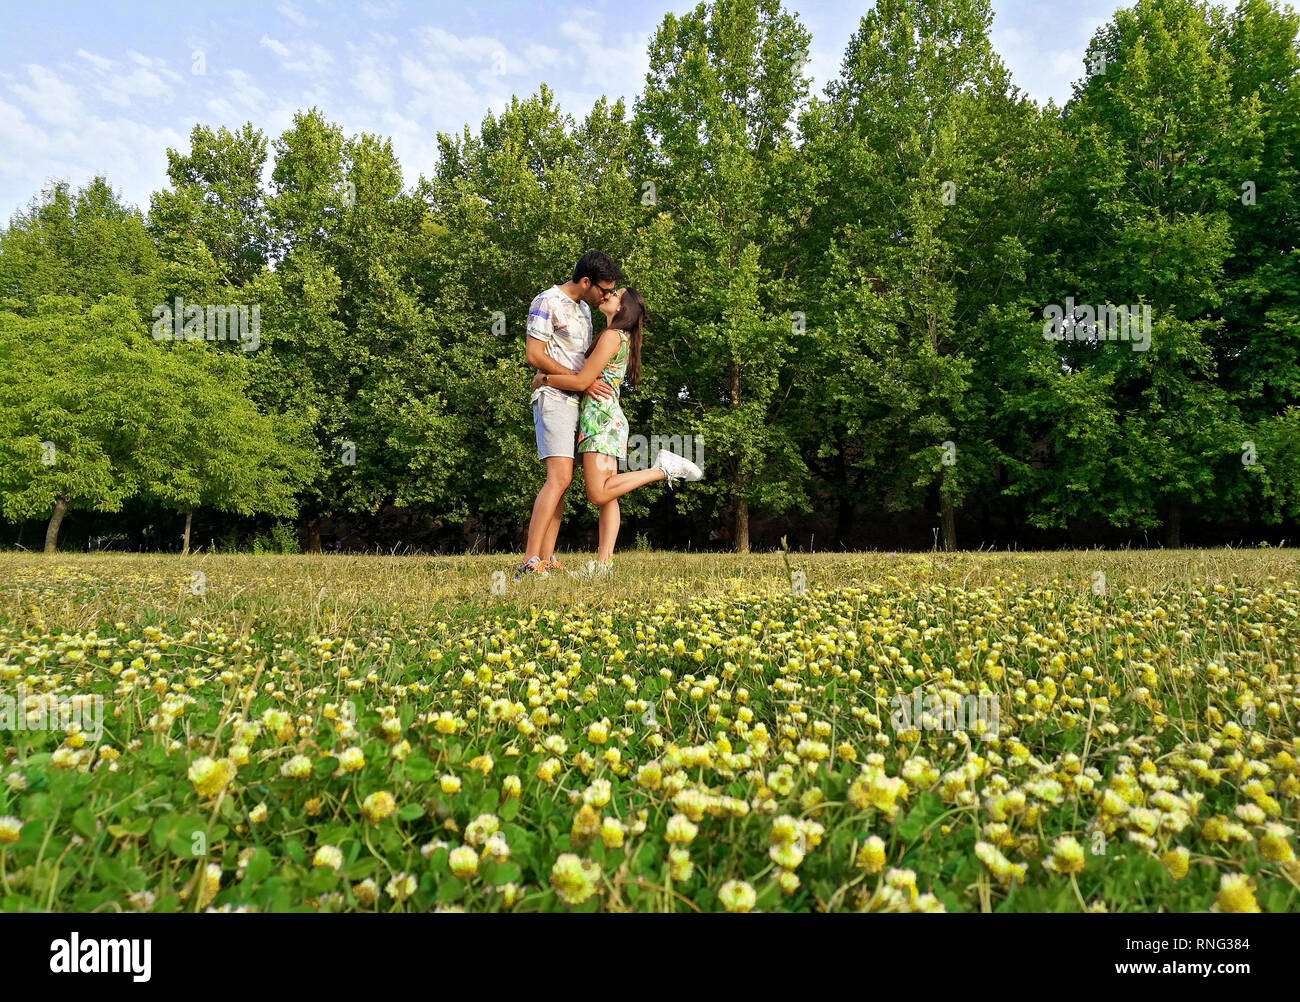 Happy loving couple kissing each other in a field full of yellow flowers. Stock Photo